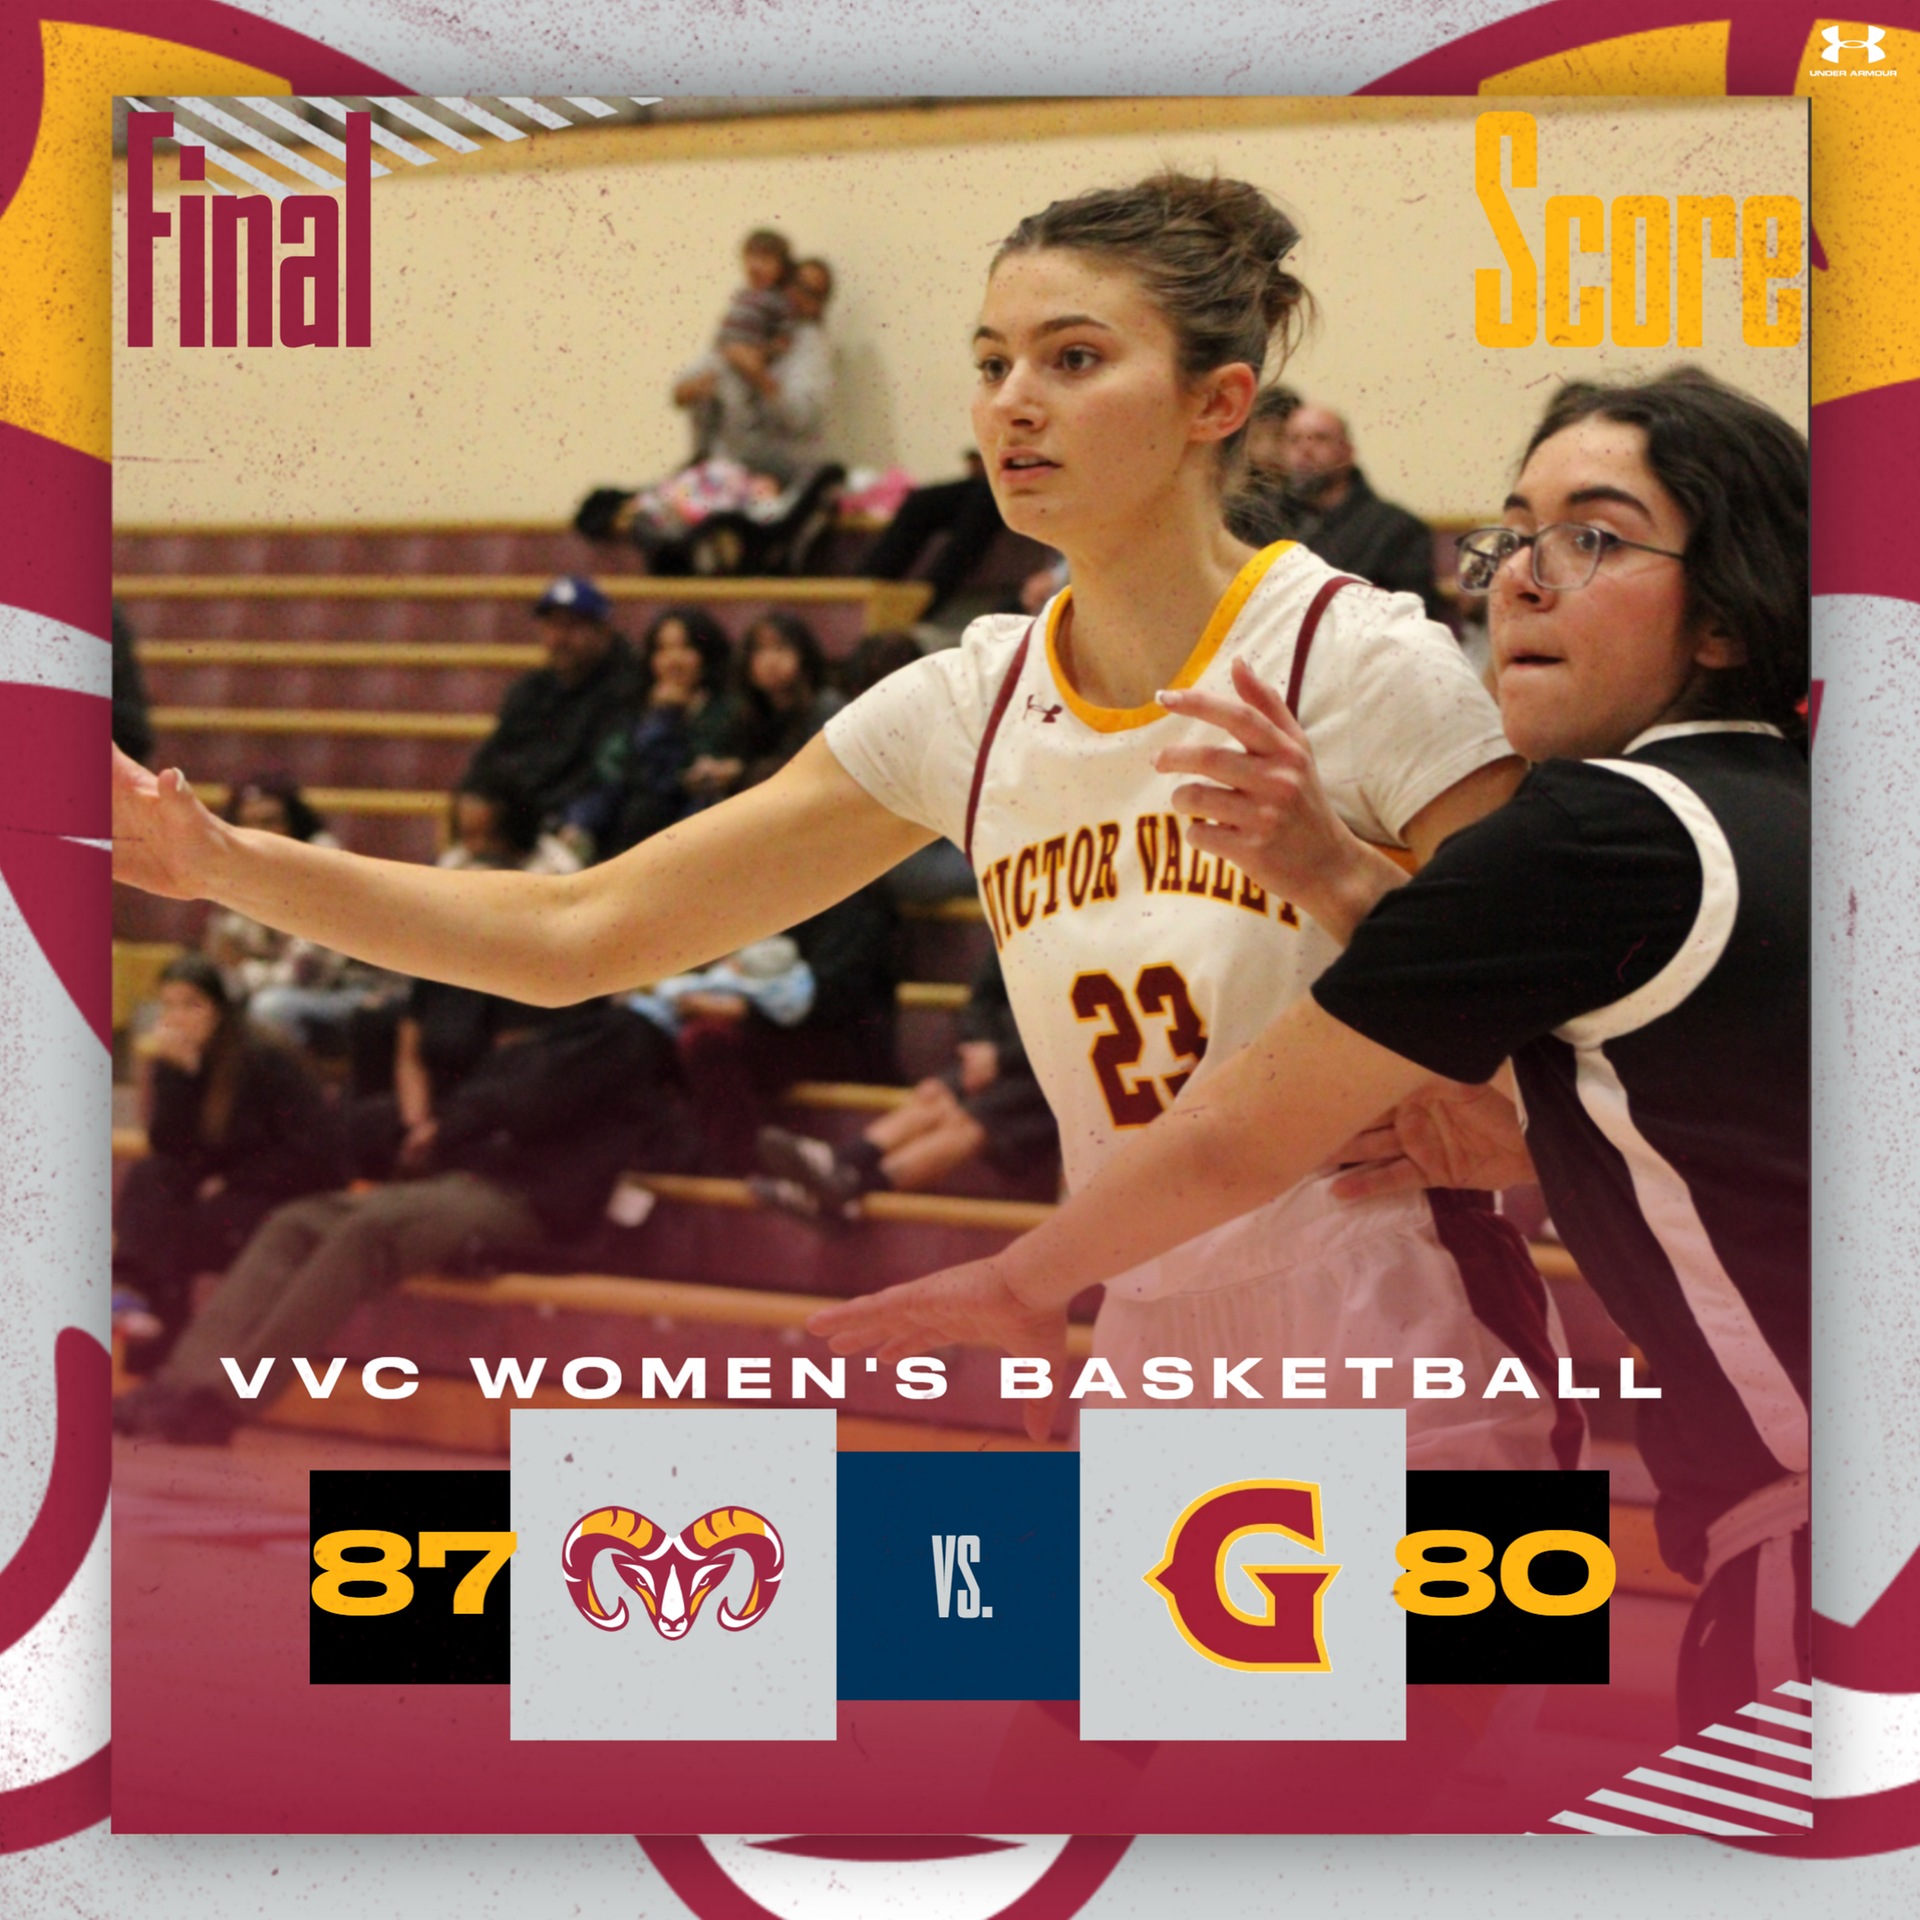 Women's Basketball With Big Win Against Glendale